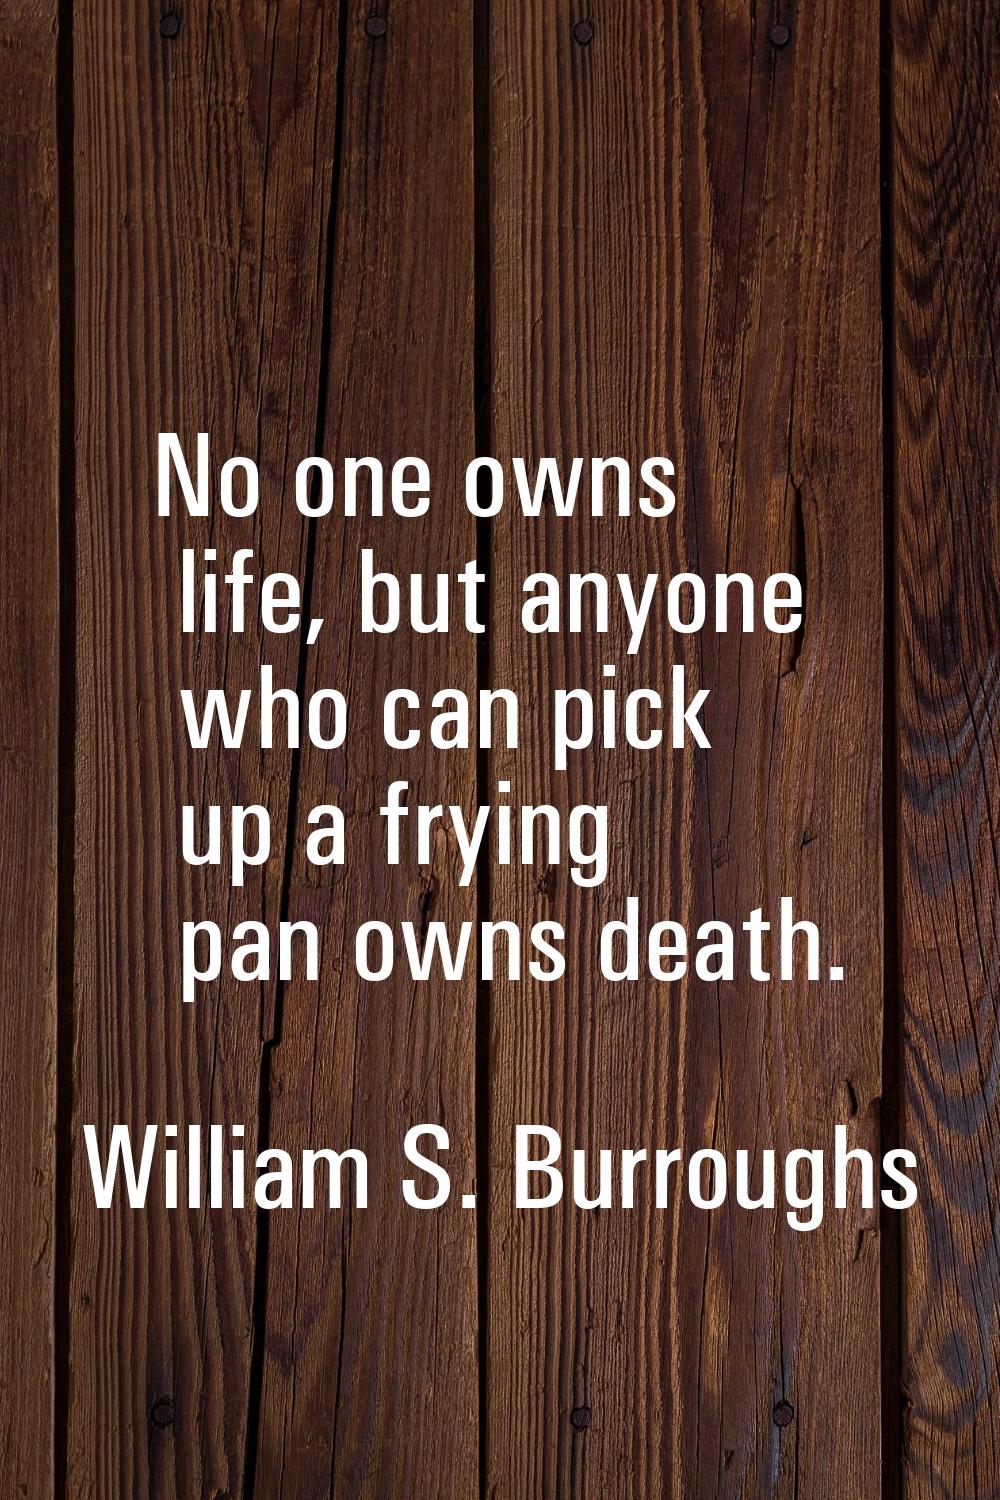 No one owns life, but anyone who can pick up a frying pan owns death.